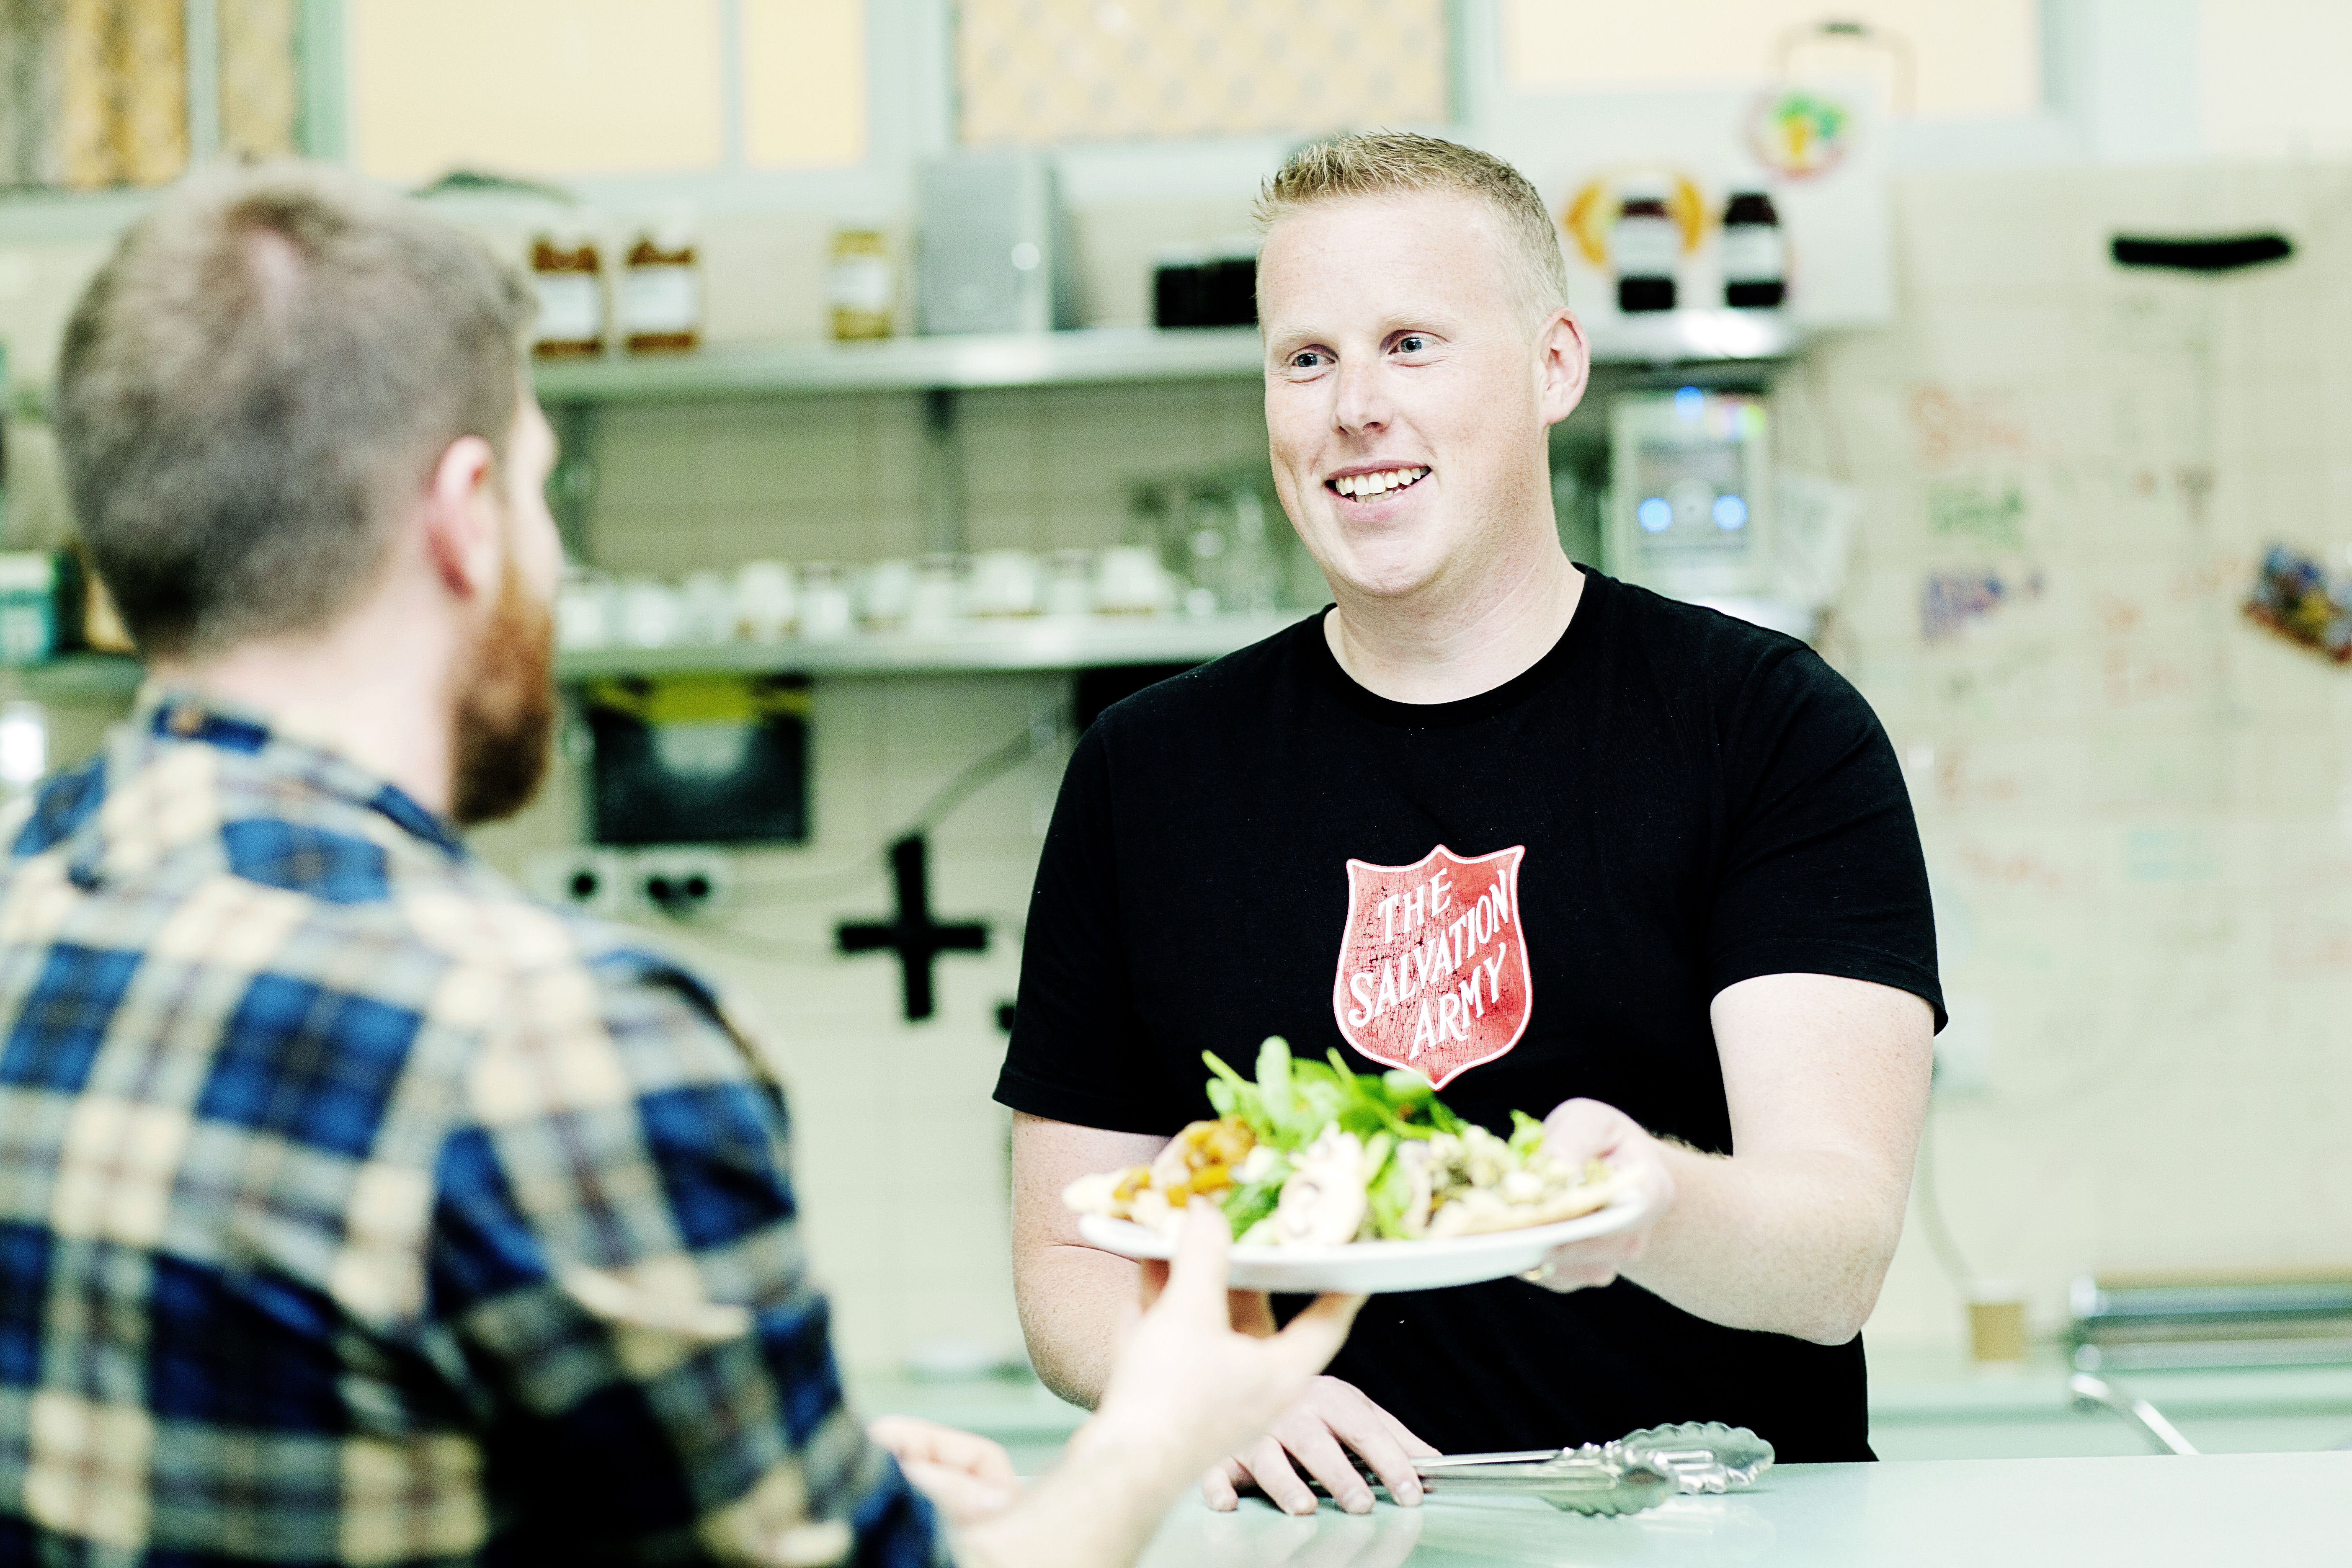 Salvation Army volunteer serving a plate of food to a bearded man